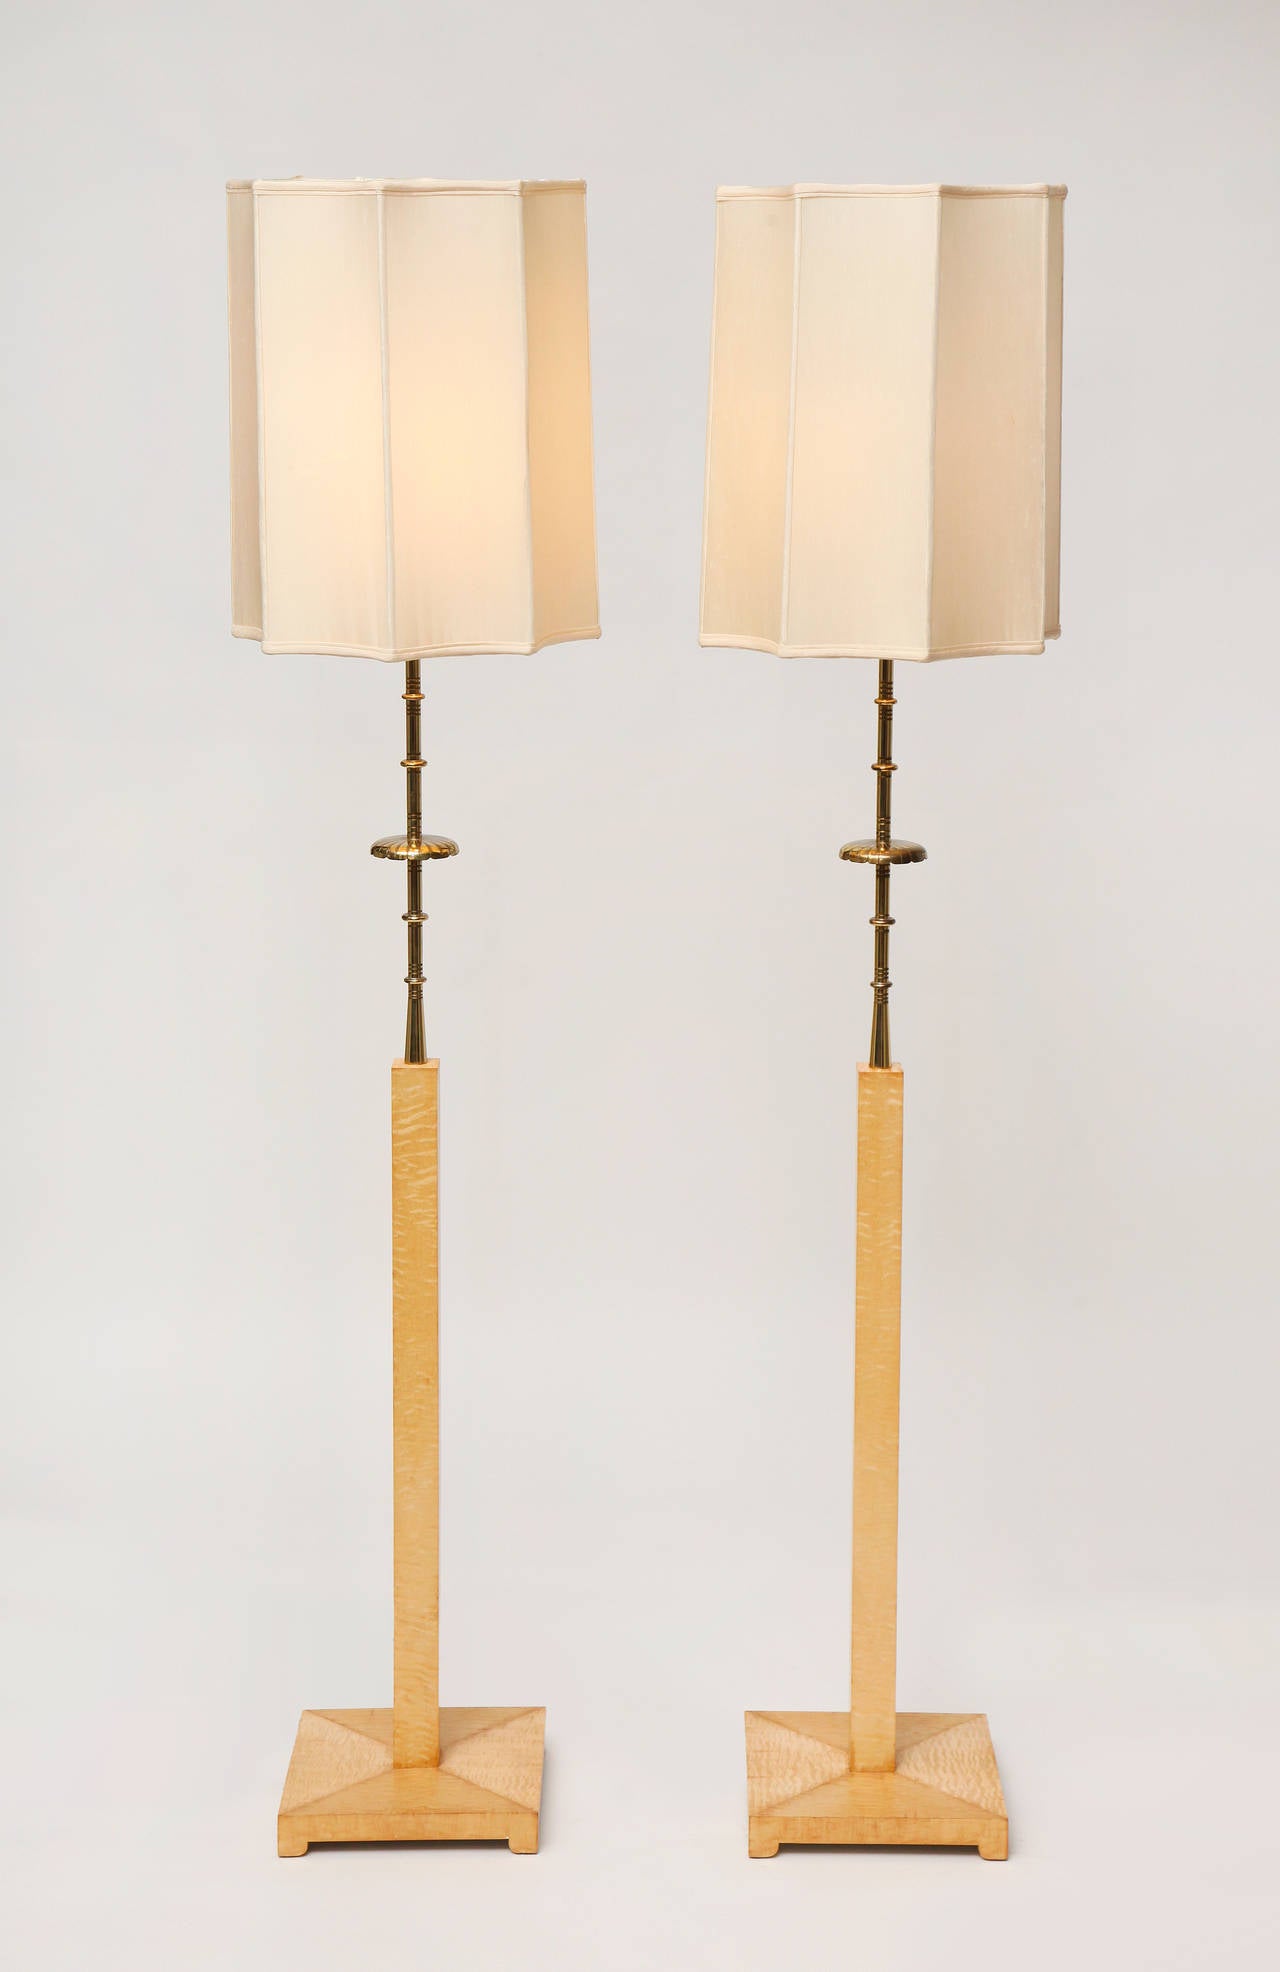 Pair of curly maple and brass floor lamps by Tommi Parzinger, with original silk shades.

This floor lamp was custom designed for the Appleman Commission.